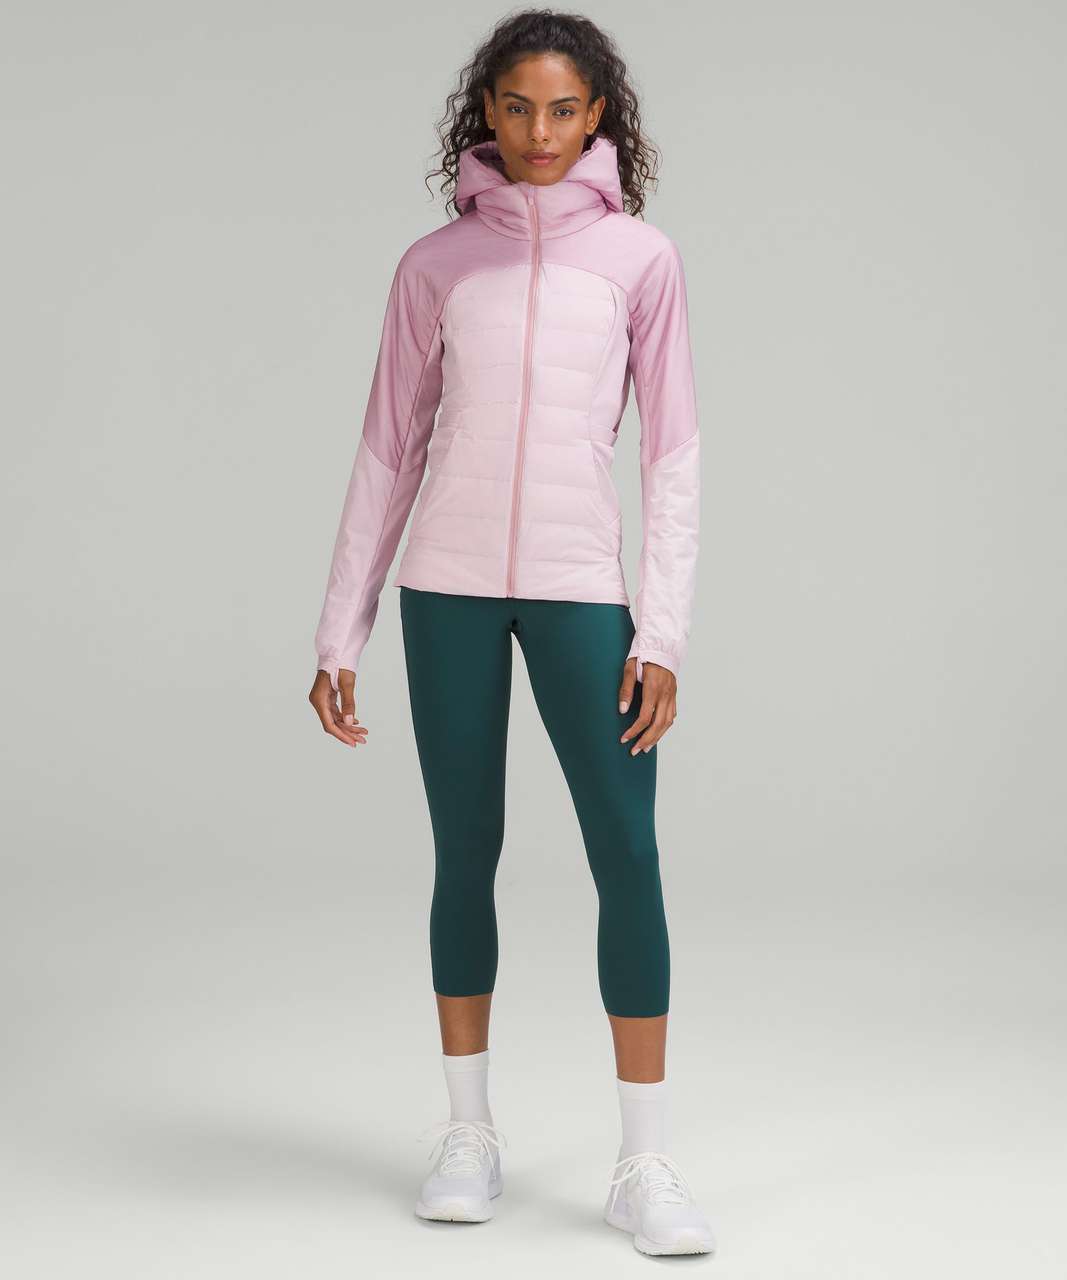 Lululemon Down for It All Jacket - Pink Peony